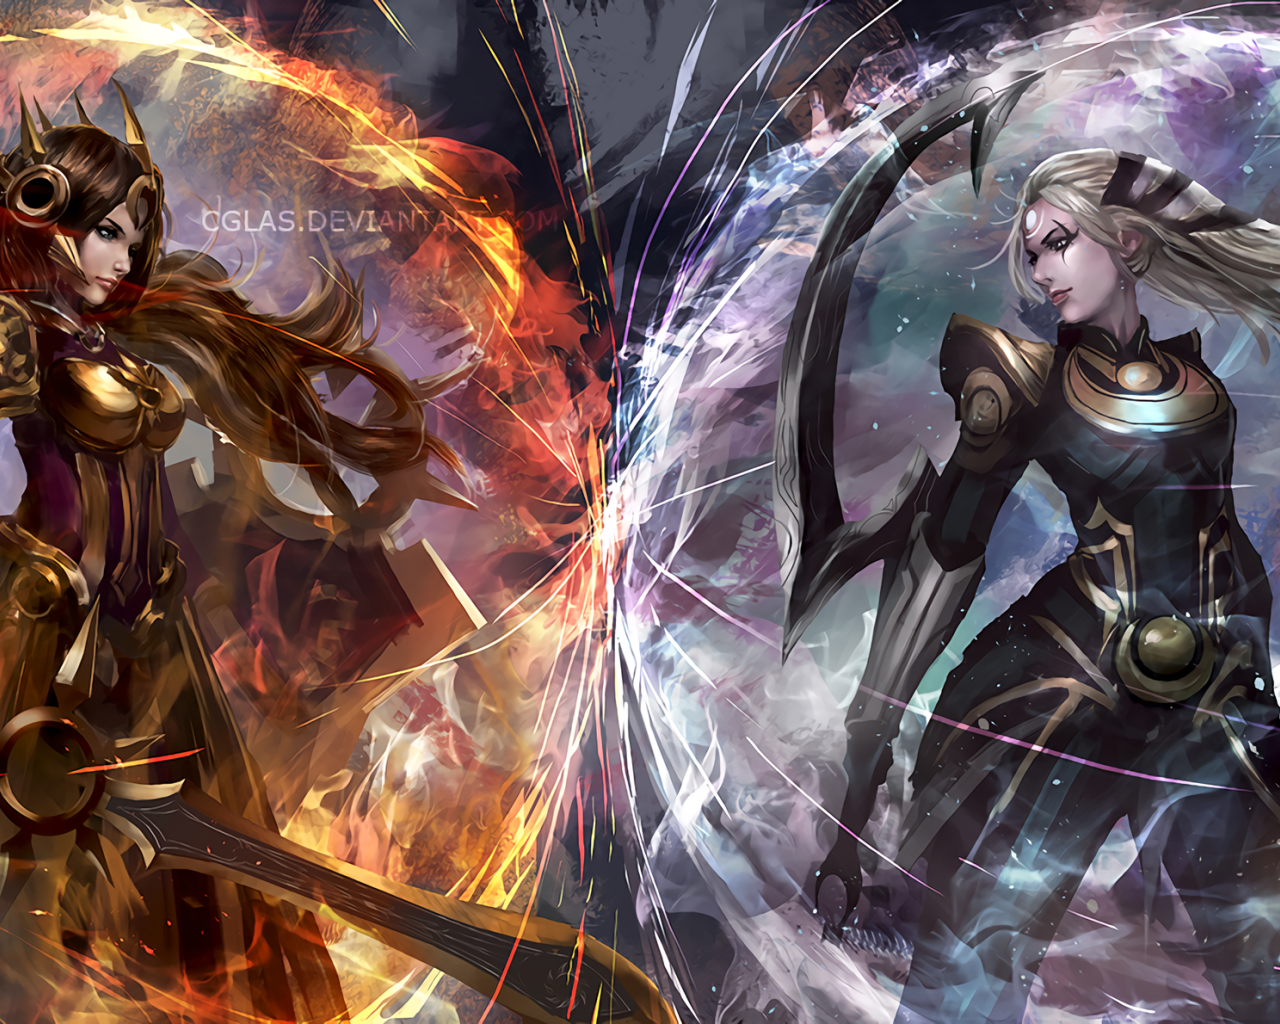 Warriors Diana and Leona characters of the game League of Legends